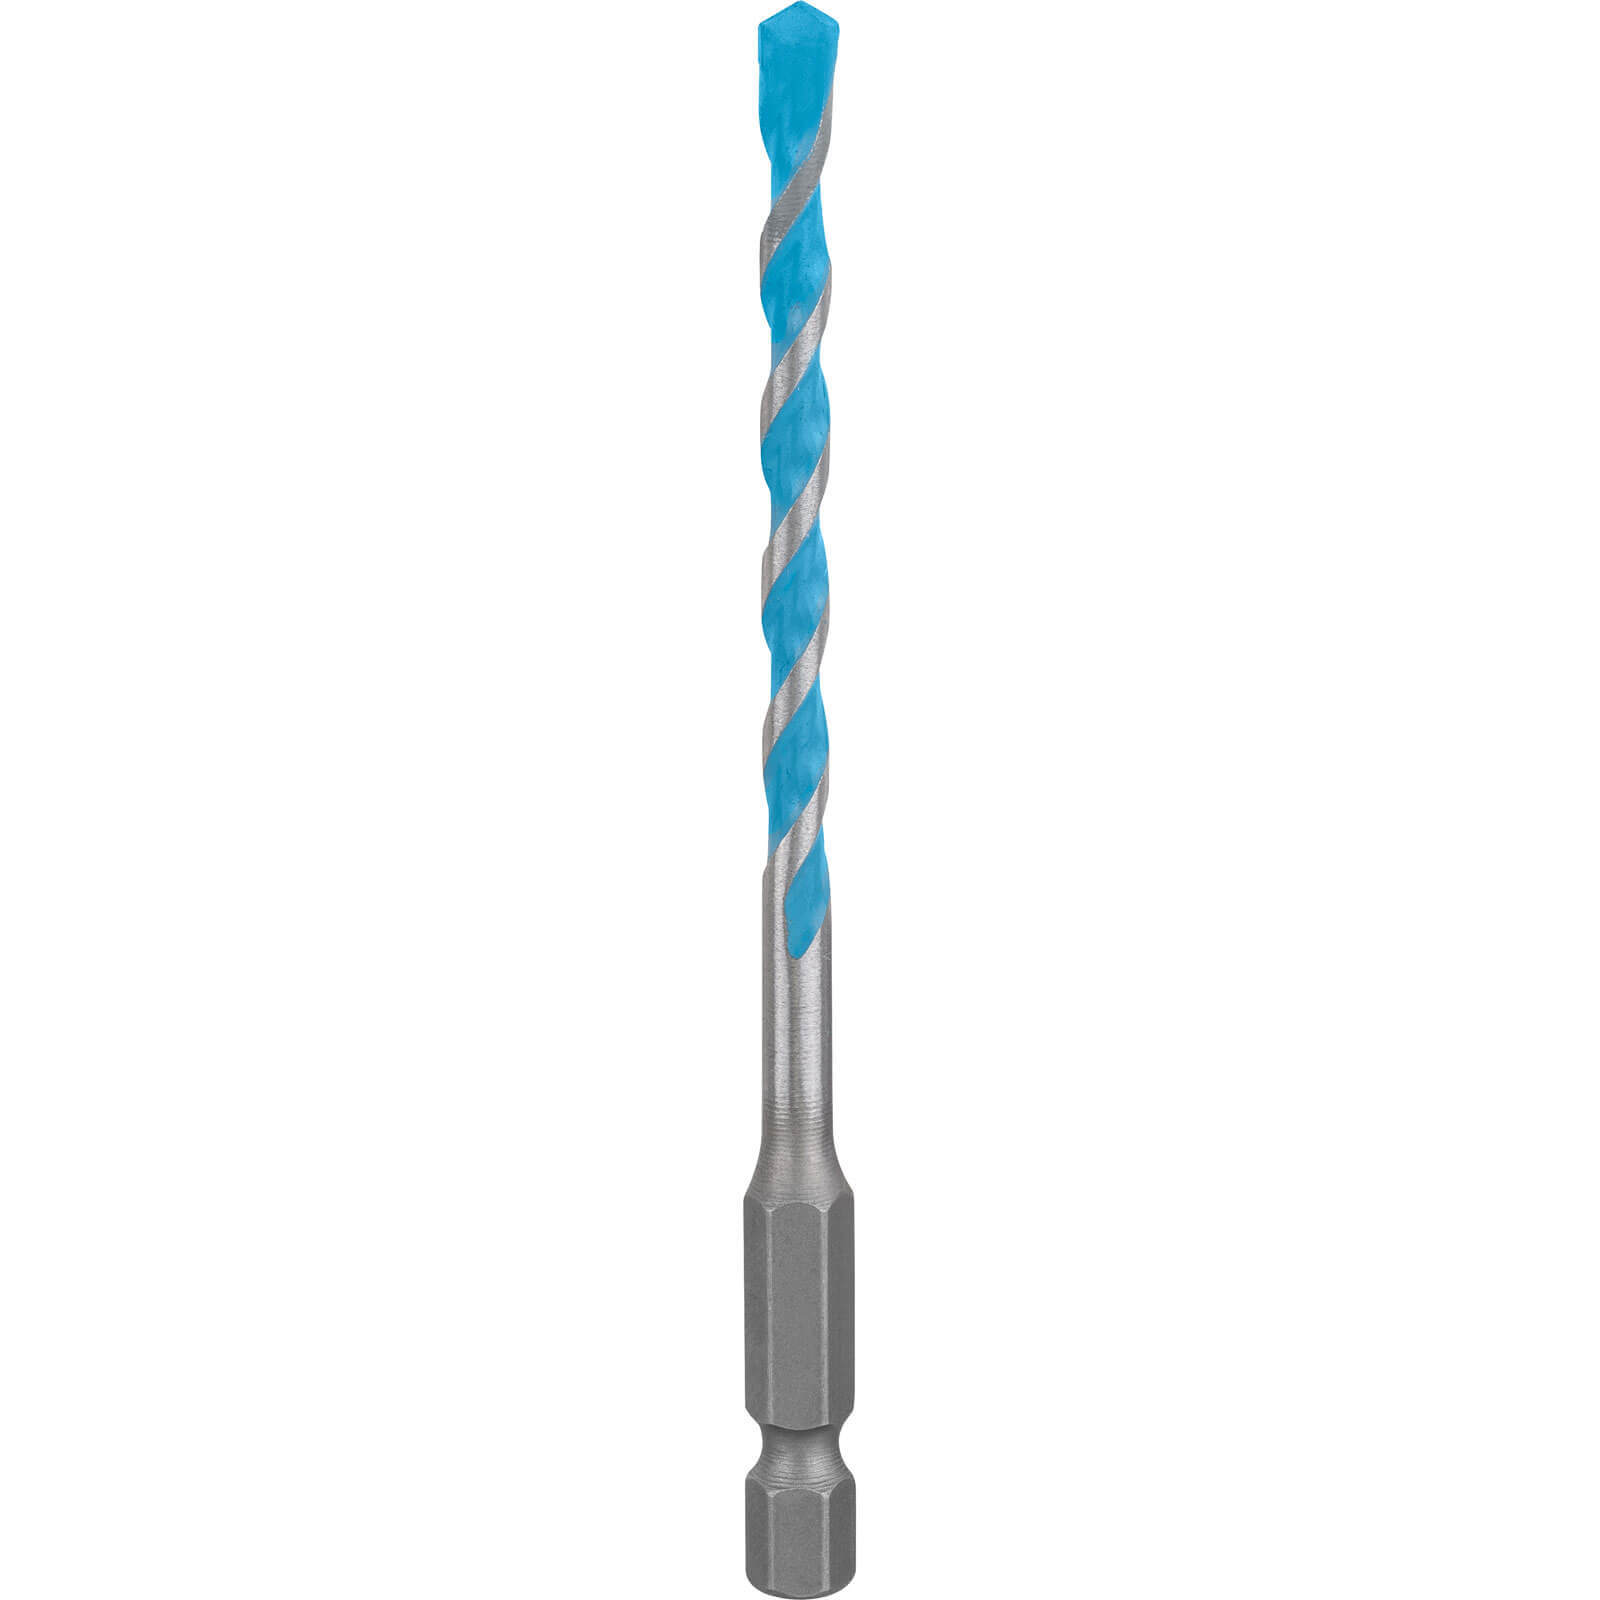 Image of Bosch Expert HEX-9 Multi Construction Drill Bit 5mm 100mm Pack of 1